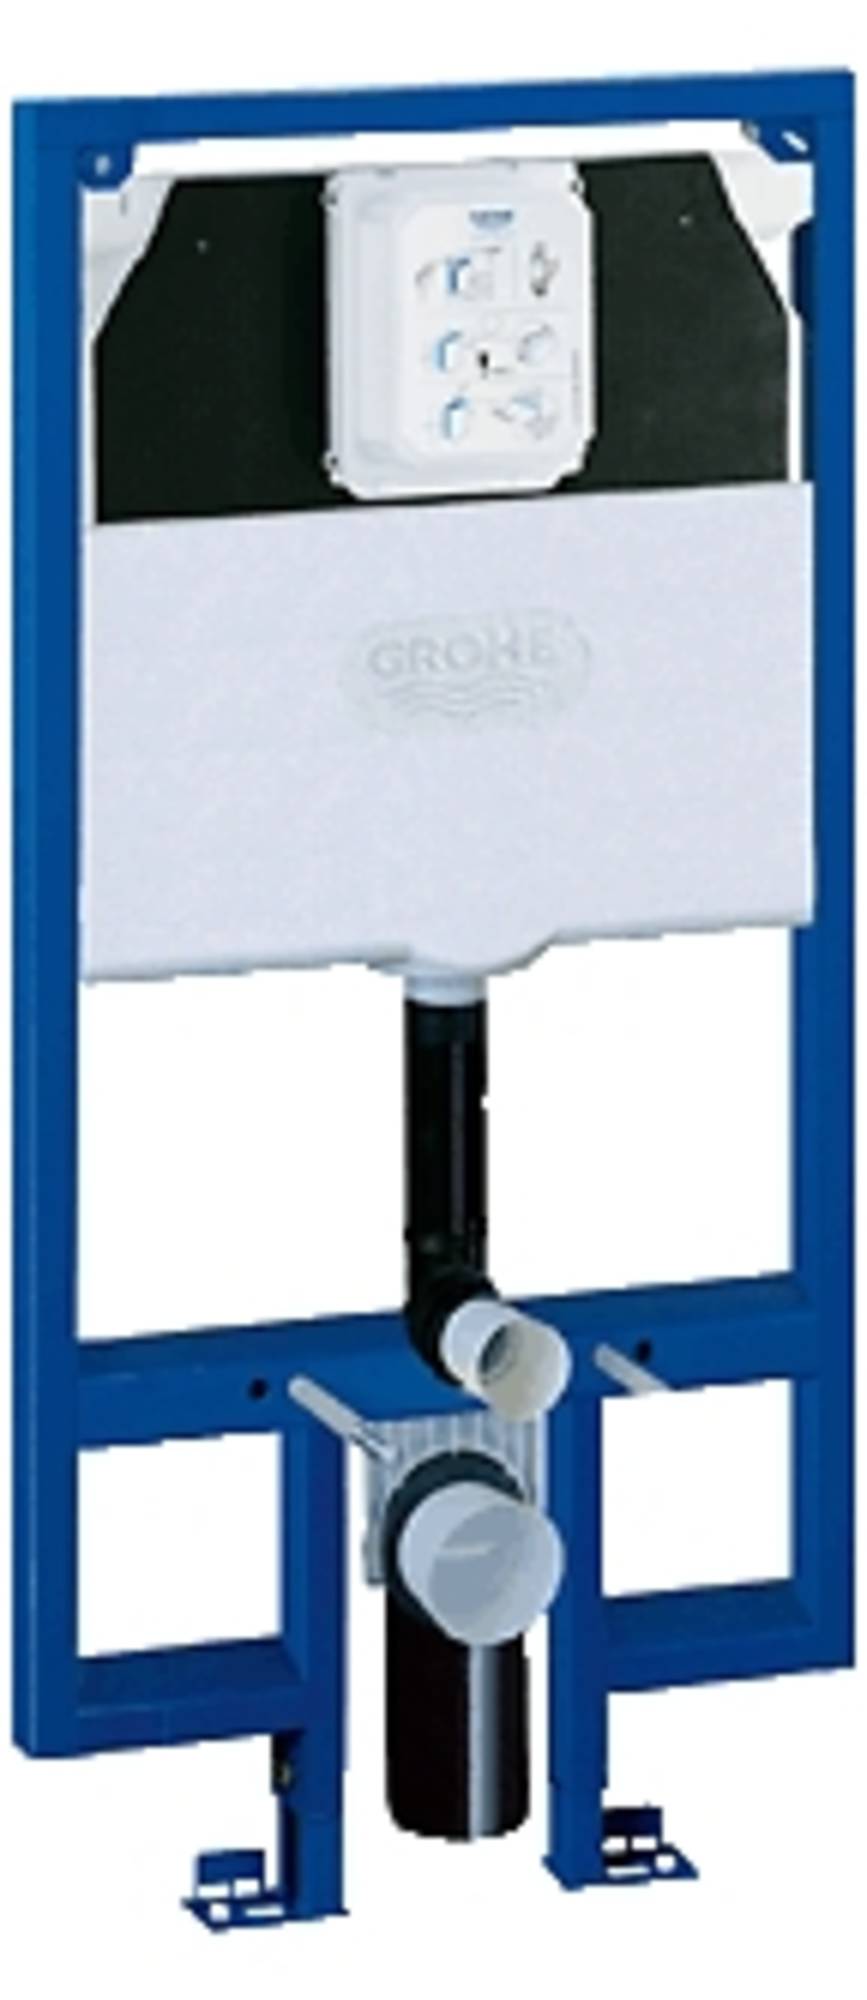 Grohe Rapid SL WC element